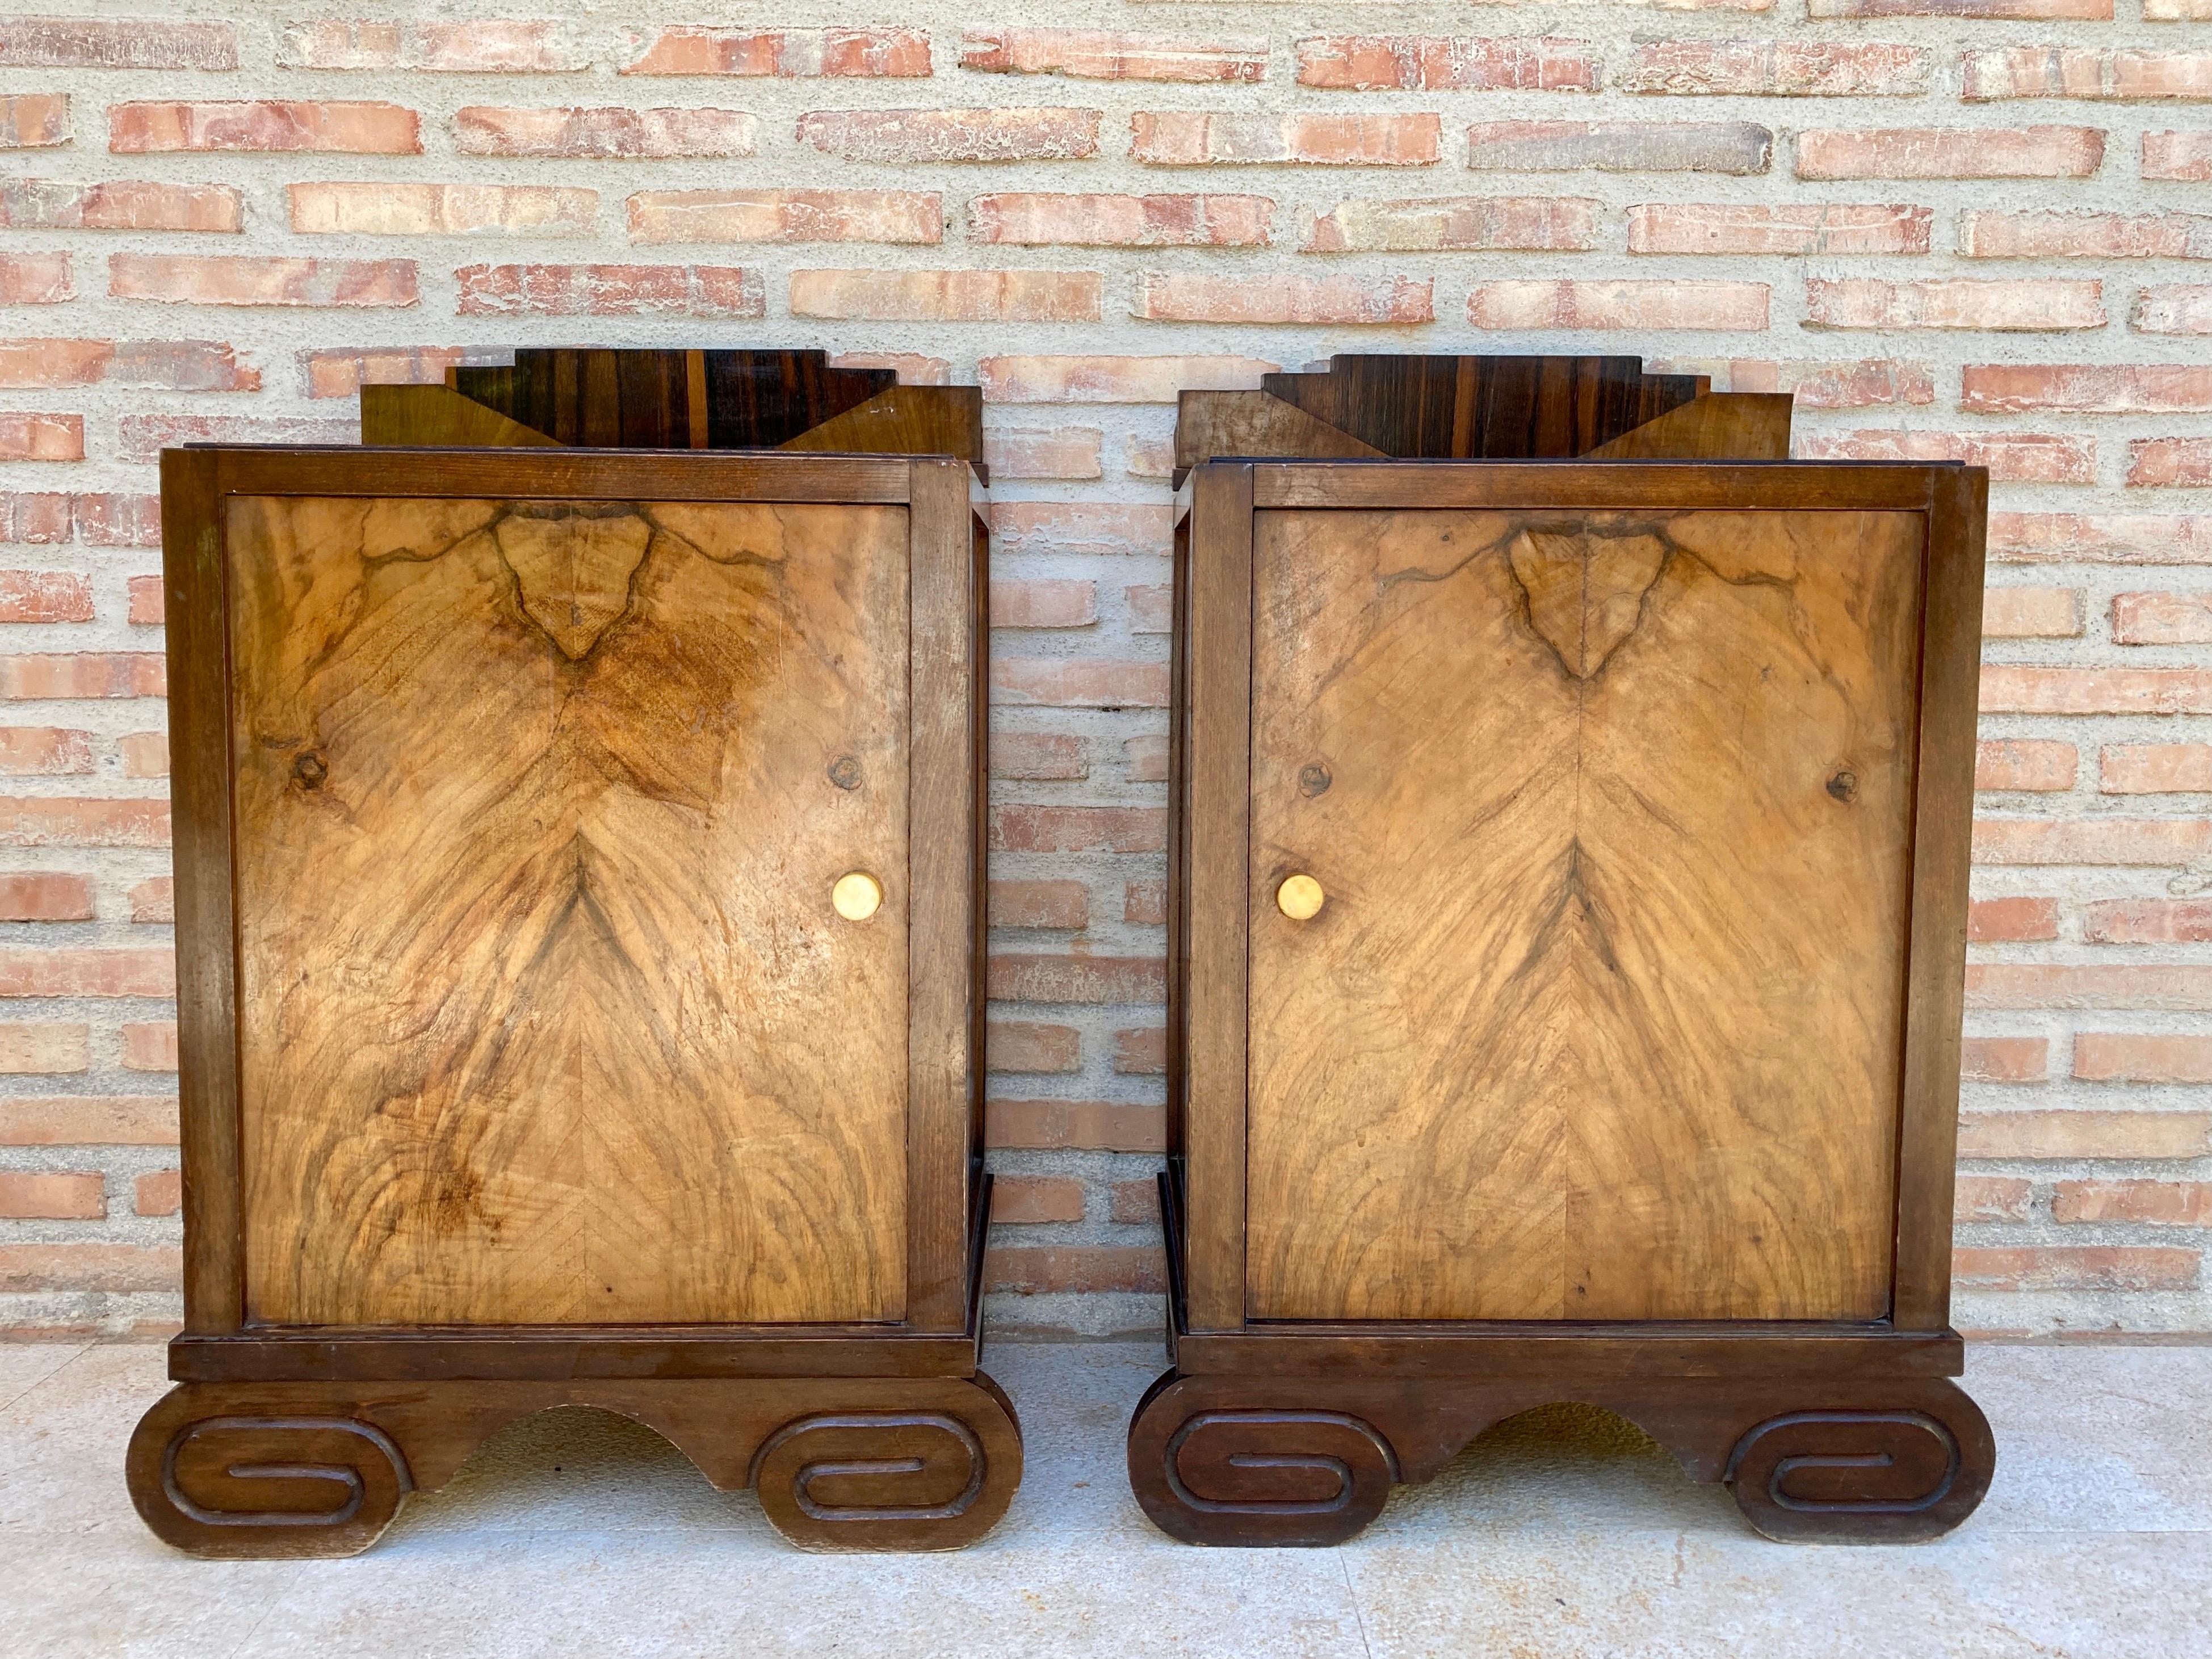 Art Deco side cabinets or nightstands with Ebonized base, 1930s, Set of 2.
Wonderful pair of Art Deco nightstands or nightstands.
Striking French design from the 1930s.
Solid walnut and walnut veneer with original resin knobs.
In very good